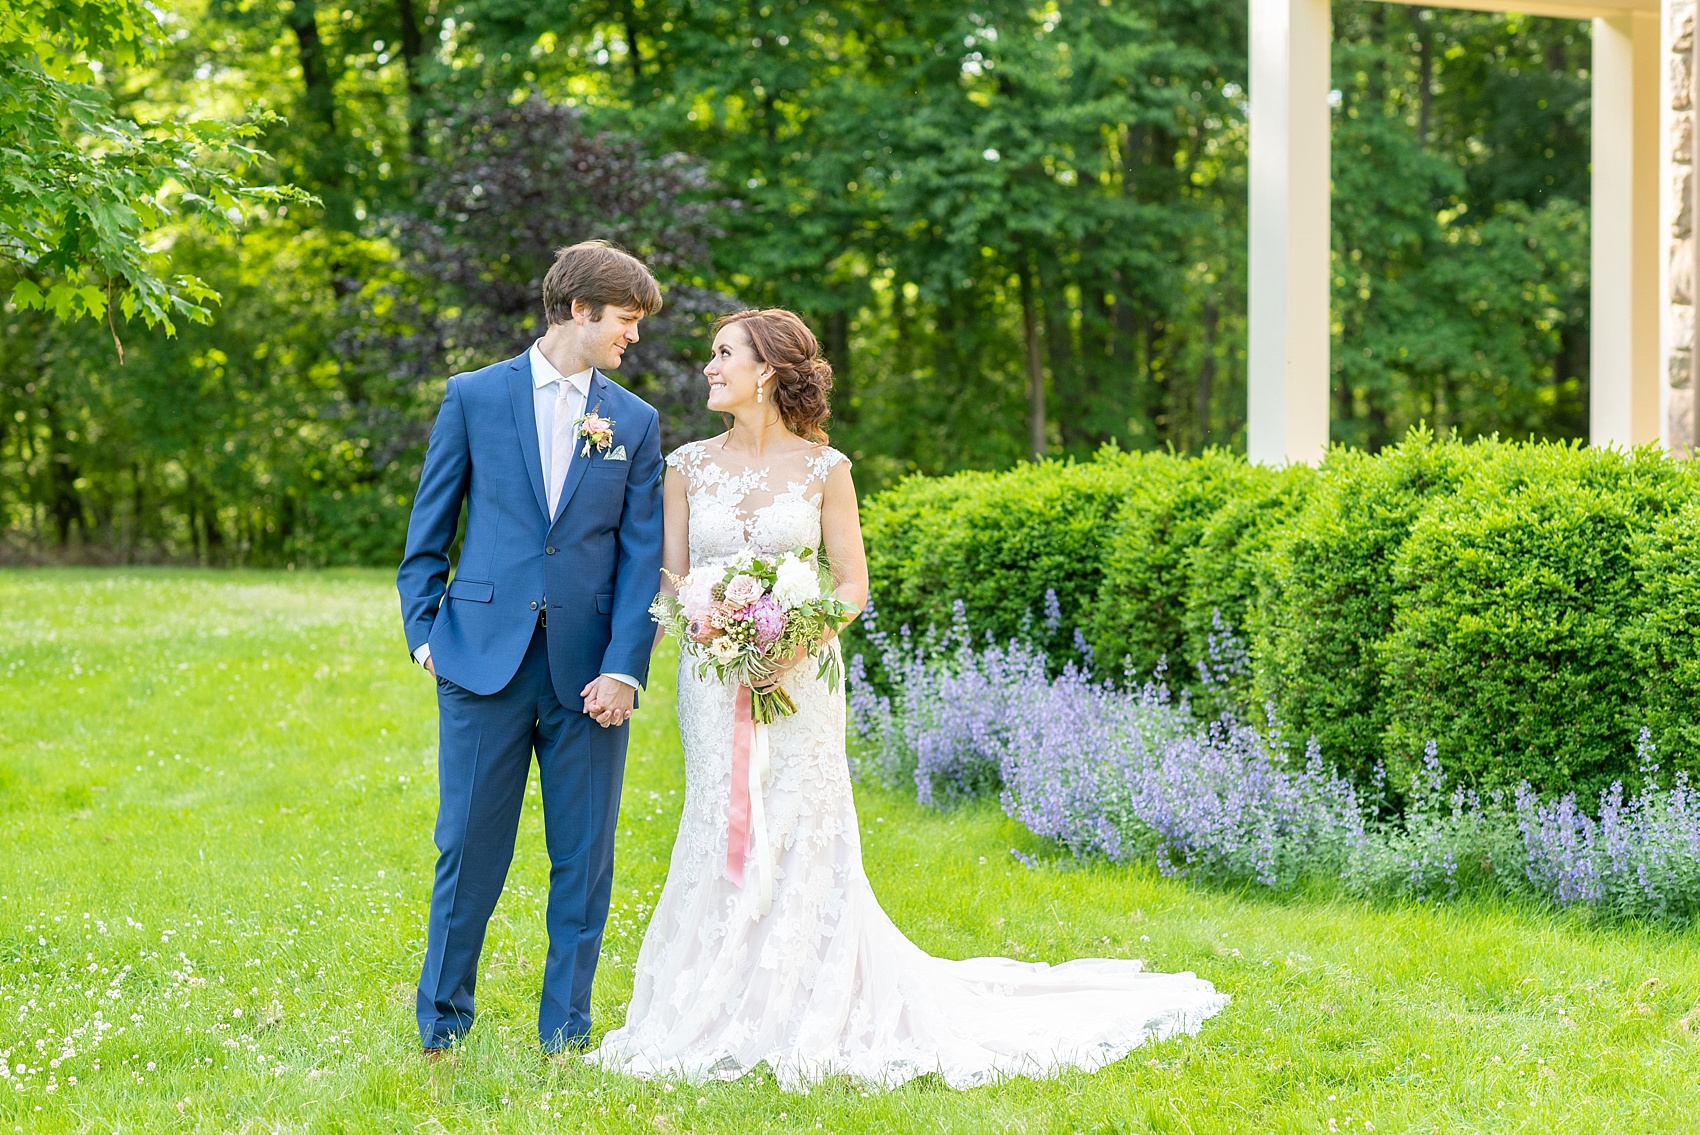 Olde Mill Inn wedding photos by Mikkel Paige Photography in New Jersey. This venue is great for a wedding in any season, from summer, to fall, spring and winter. The bride and groom chose to do their bridal party photos in the nearby Cross Estate Gardens. Click through for more! #mikkelpaige #newjerseyweddingphotos #newjerseyweddingphotographer